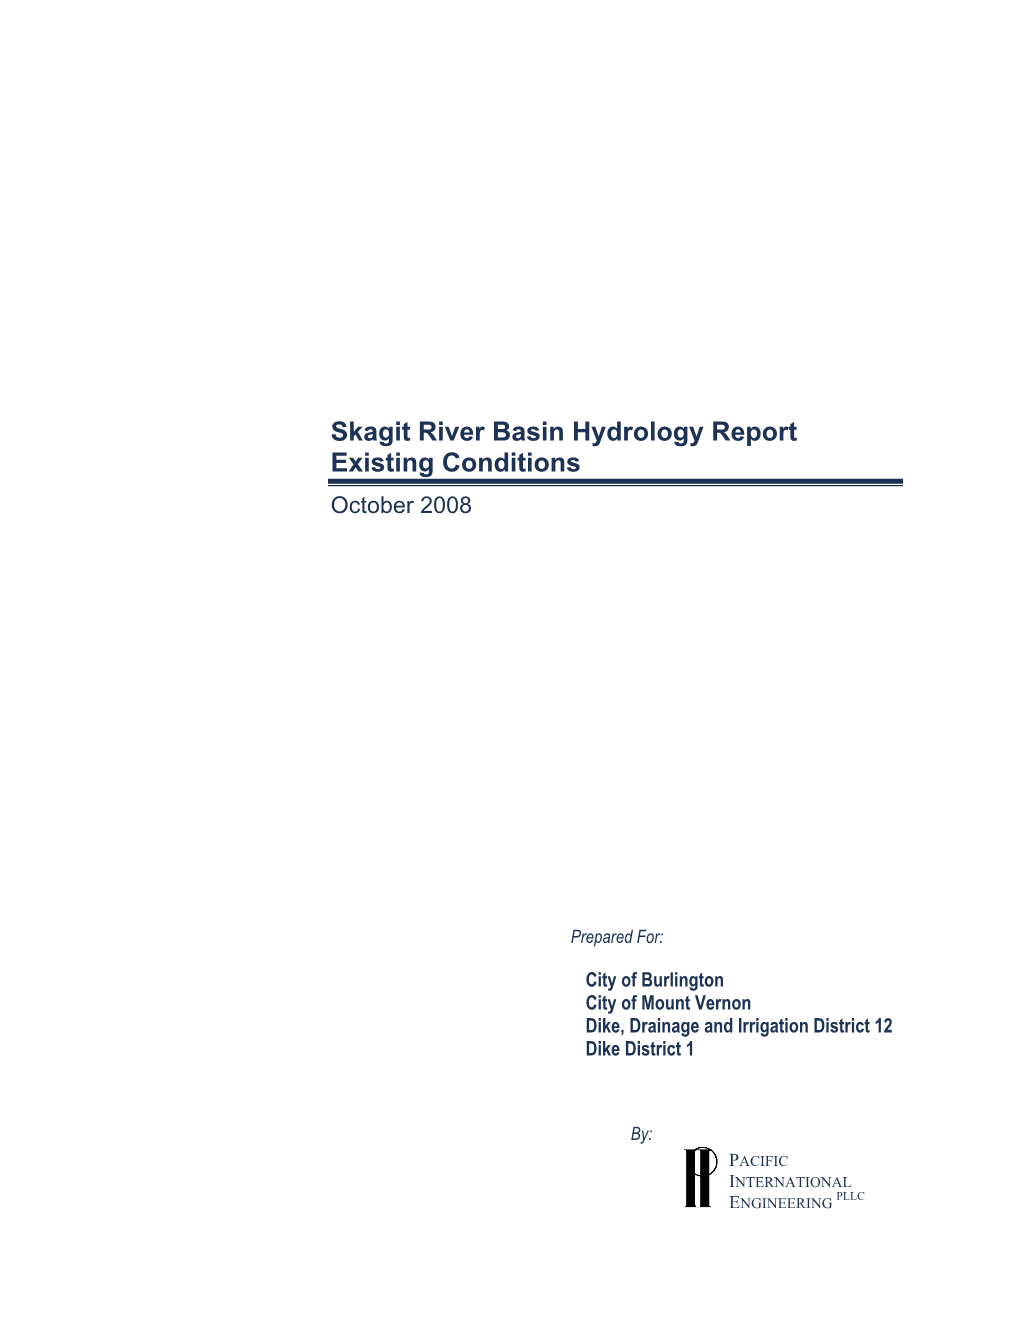 Skagit River Basin Hydrology Report Existing Conditions October 2008